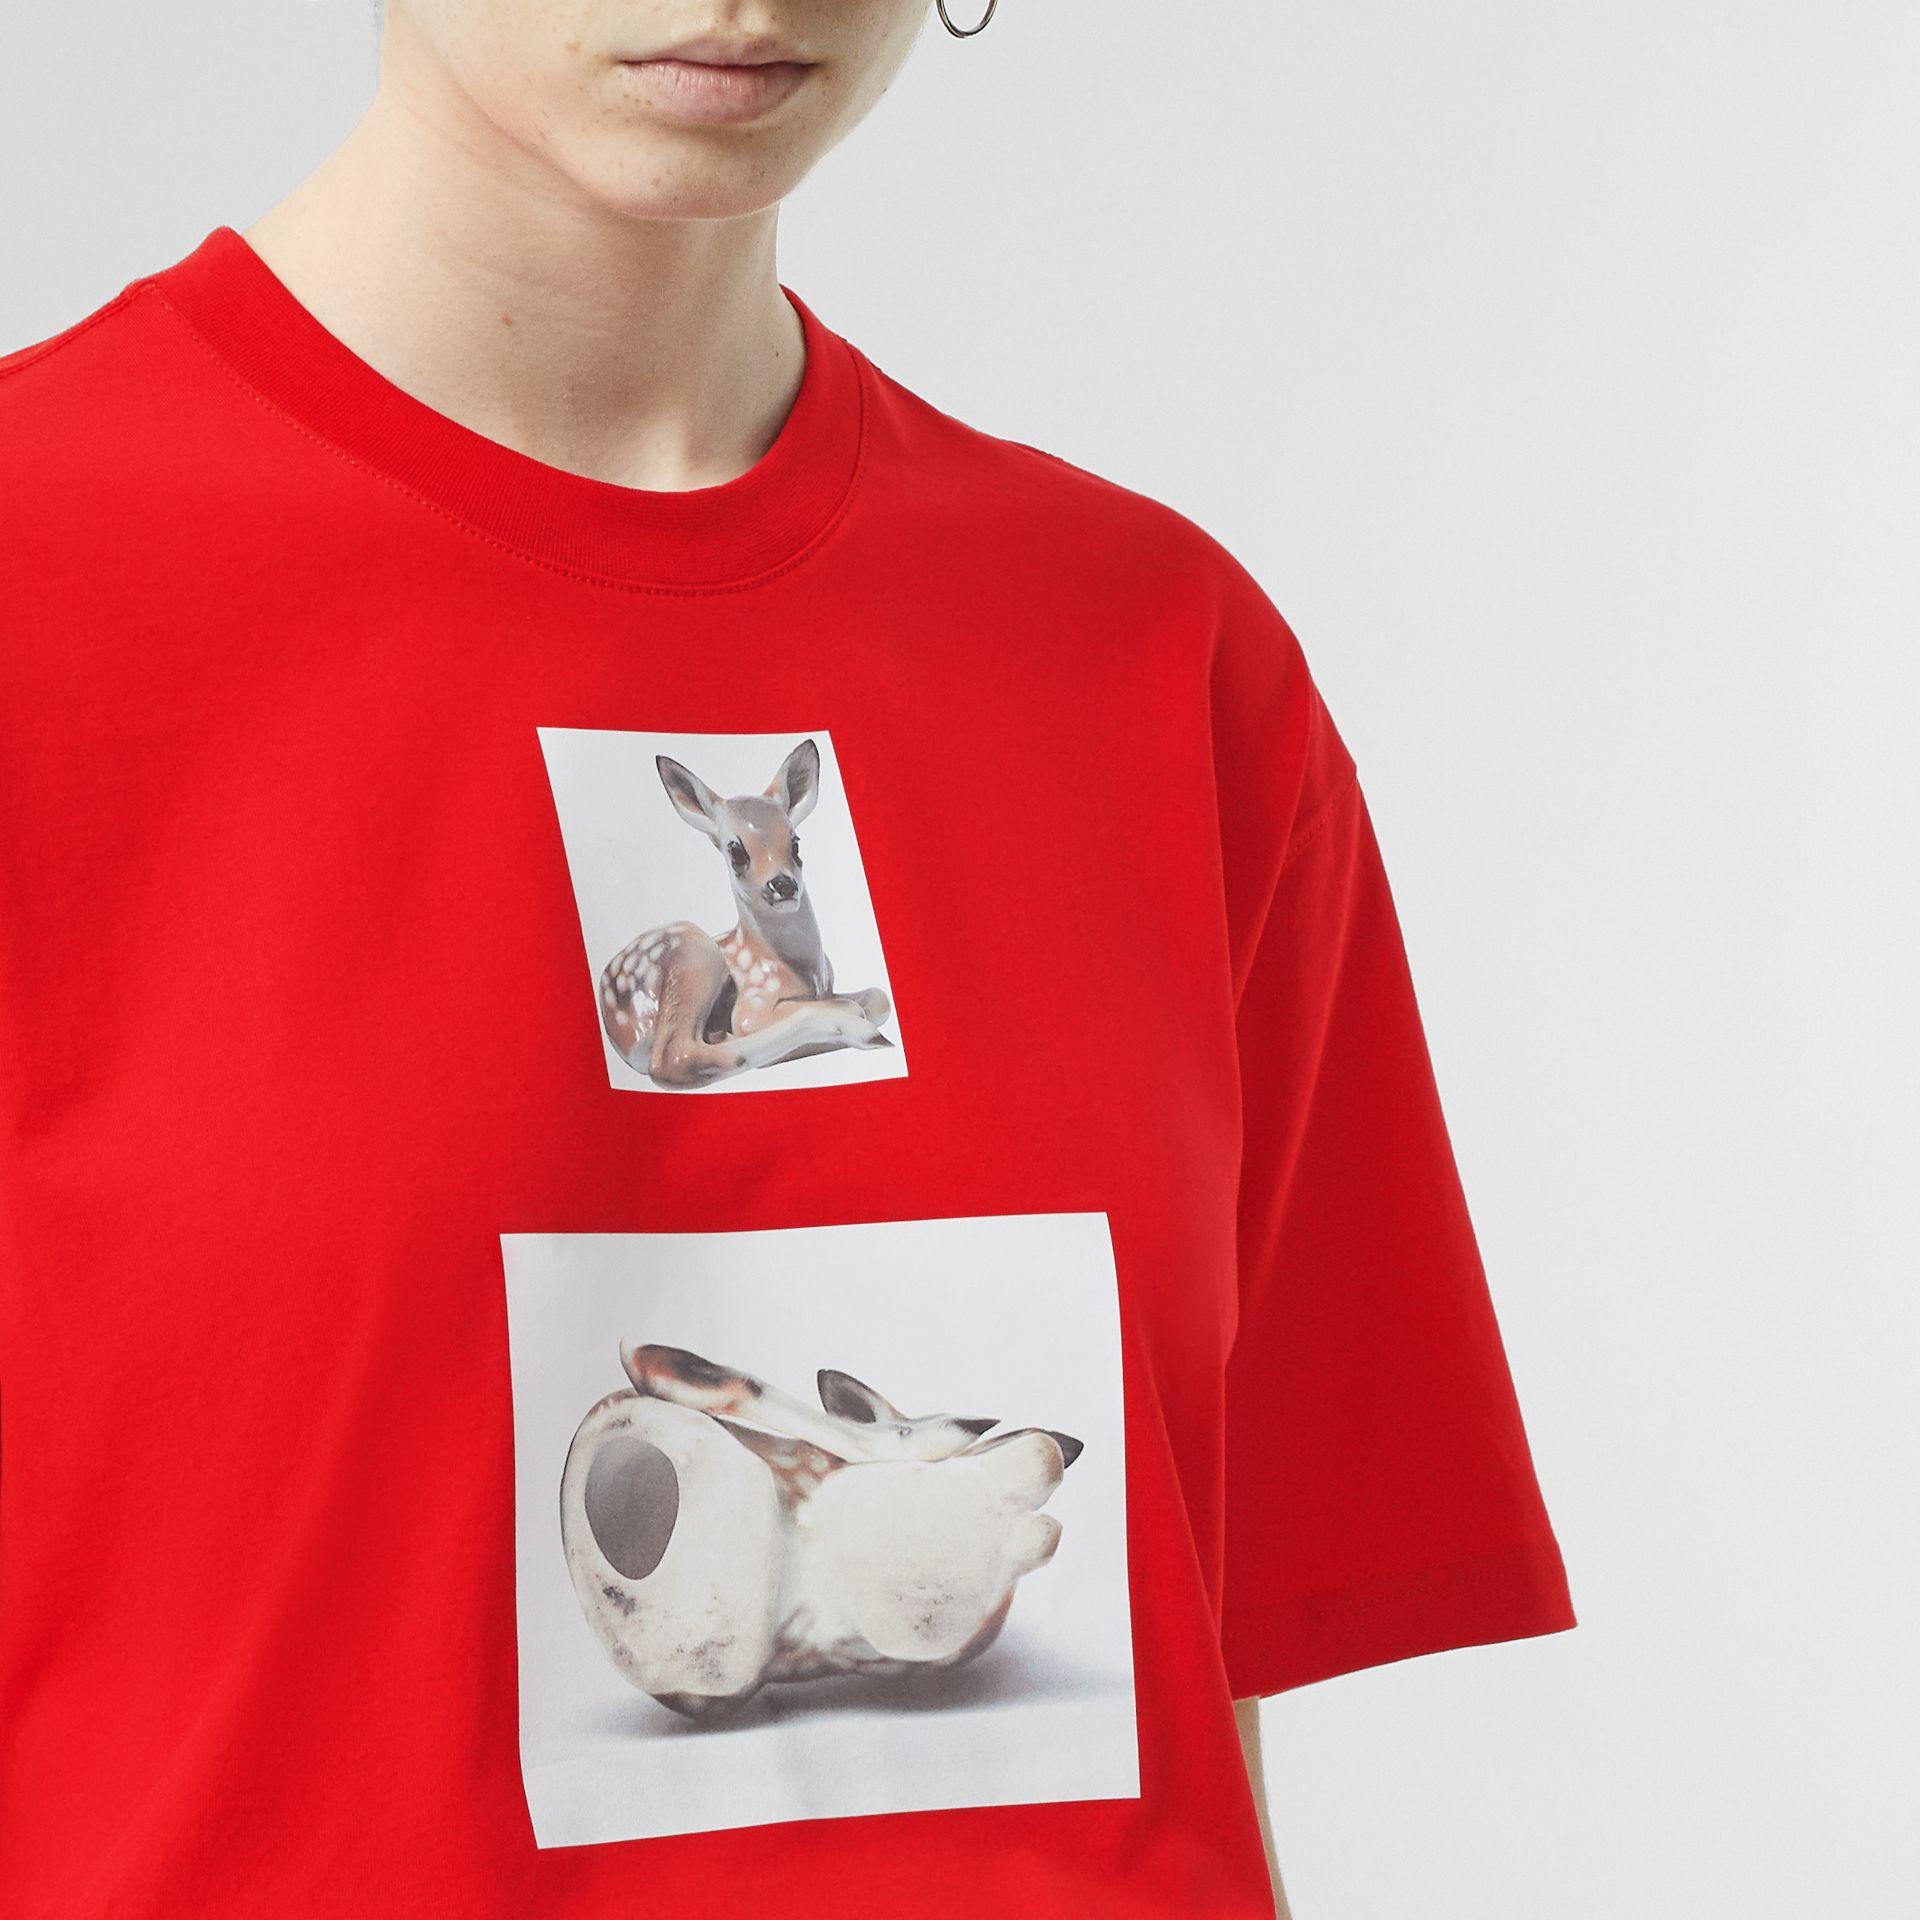 Burberry Deer Print Cotton T-shirt in Bright Red (Red) - Lyst